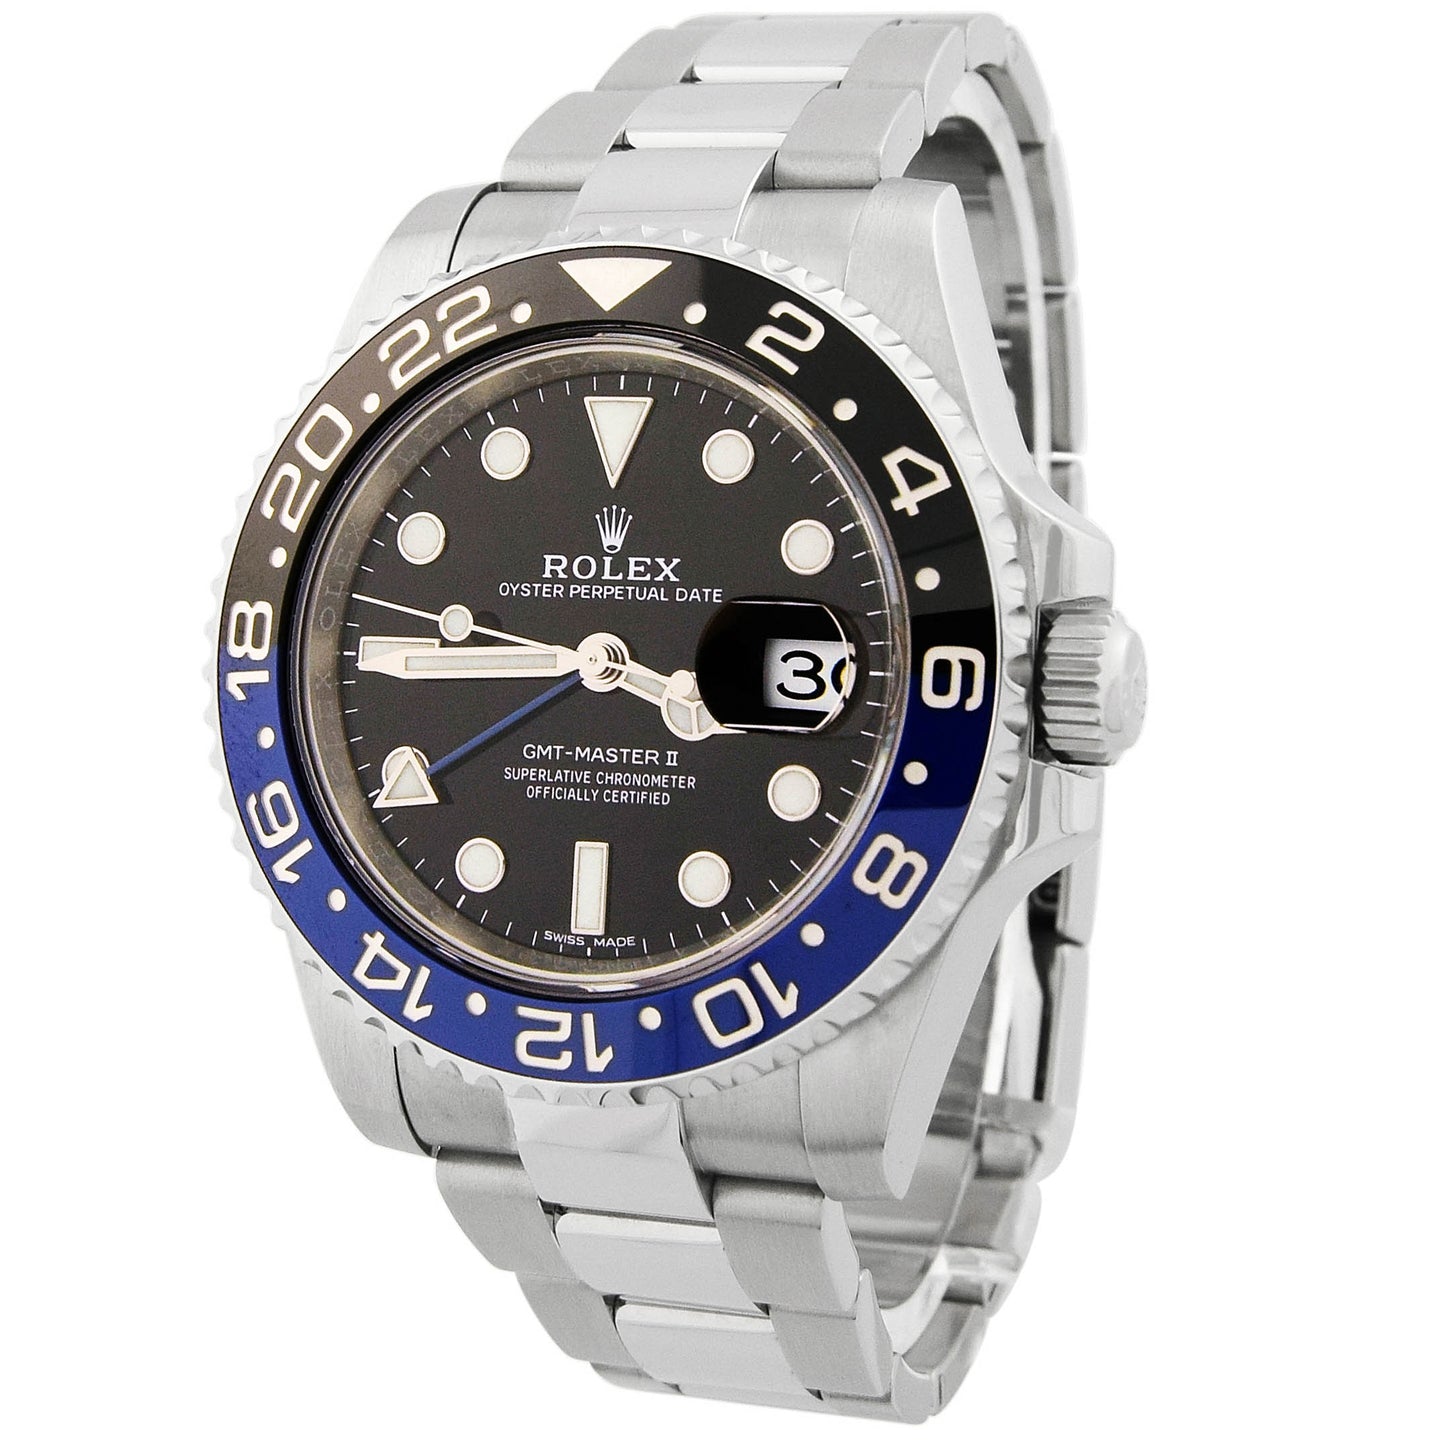 NEW! Rolex Men's GMT-Master II "Batman" Stainless 40mm Dot Dial Watch Reference #: 126710BLNR | Happy Jewelers